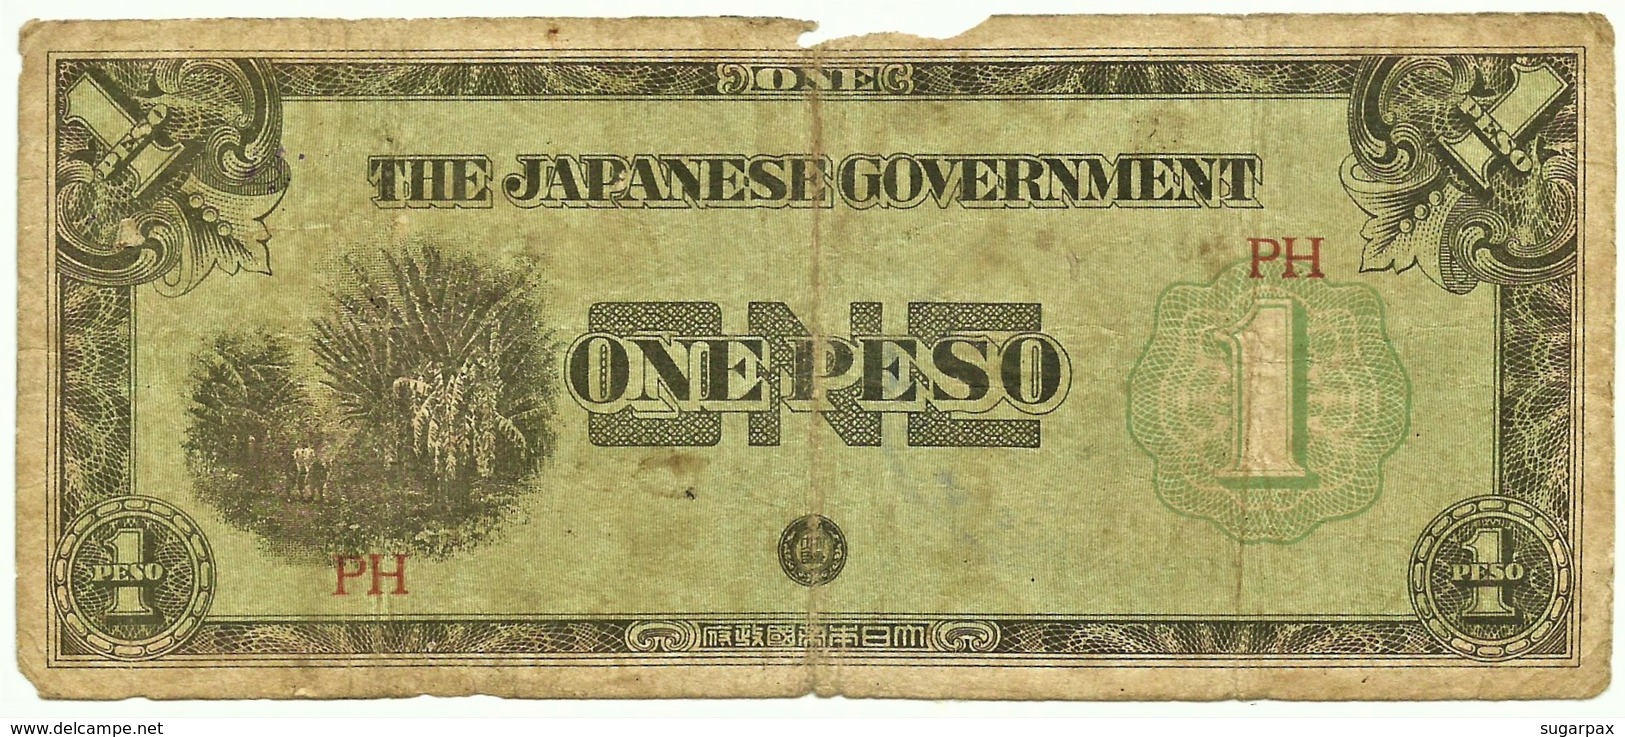 PHILIPPINES - 1 Peso - ND ( 1942 ) WWII - Pick 106.b - With OVERPRINT - Serie PH - Japanese Occupation - Philippines